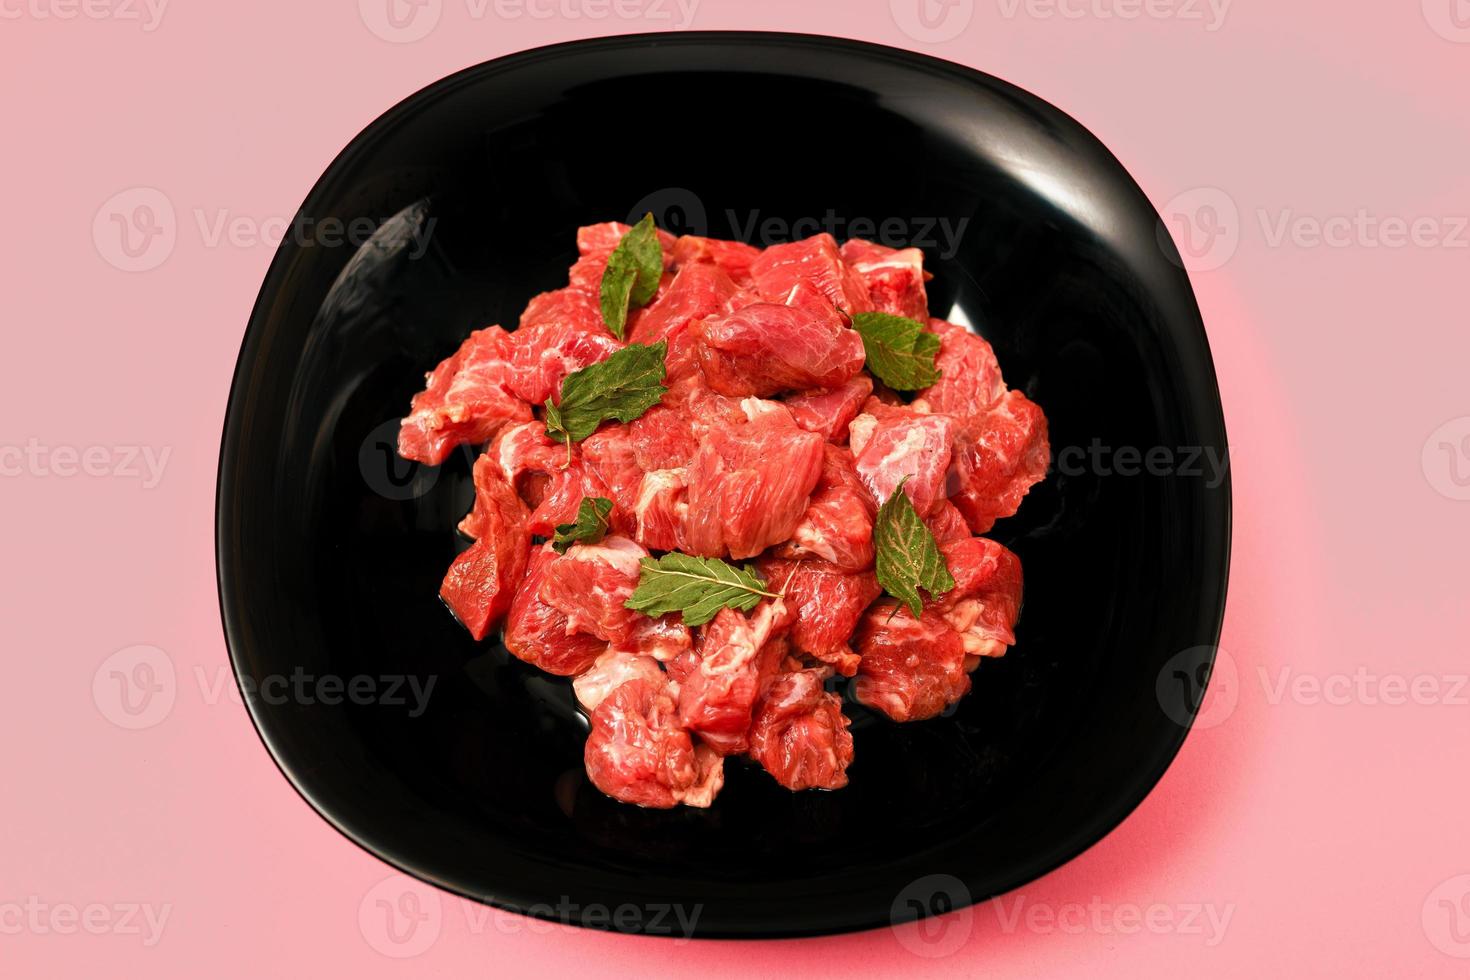 pork chopped into small pieces in a black plate on a bright colored background photo